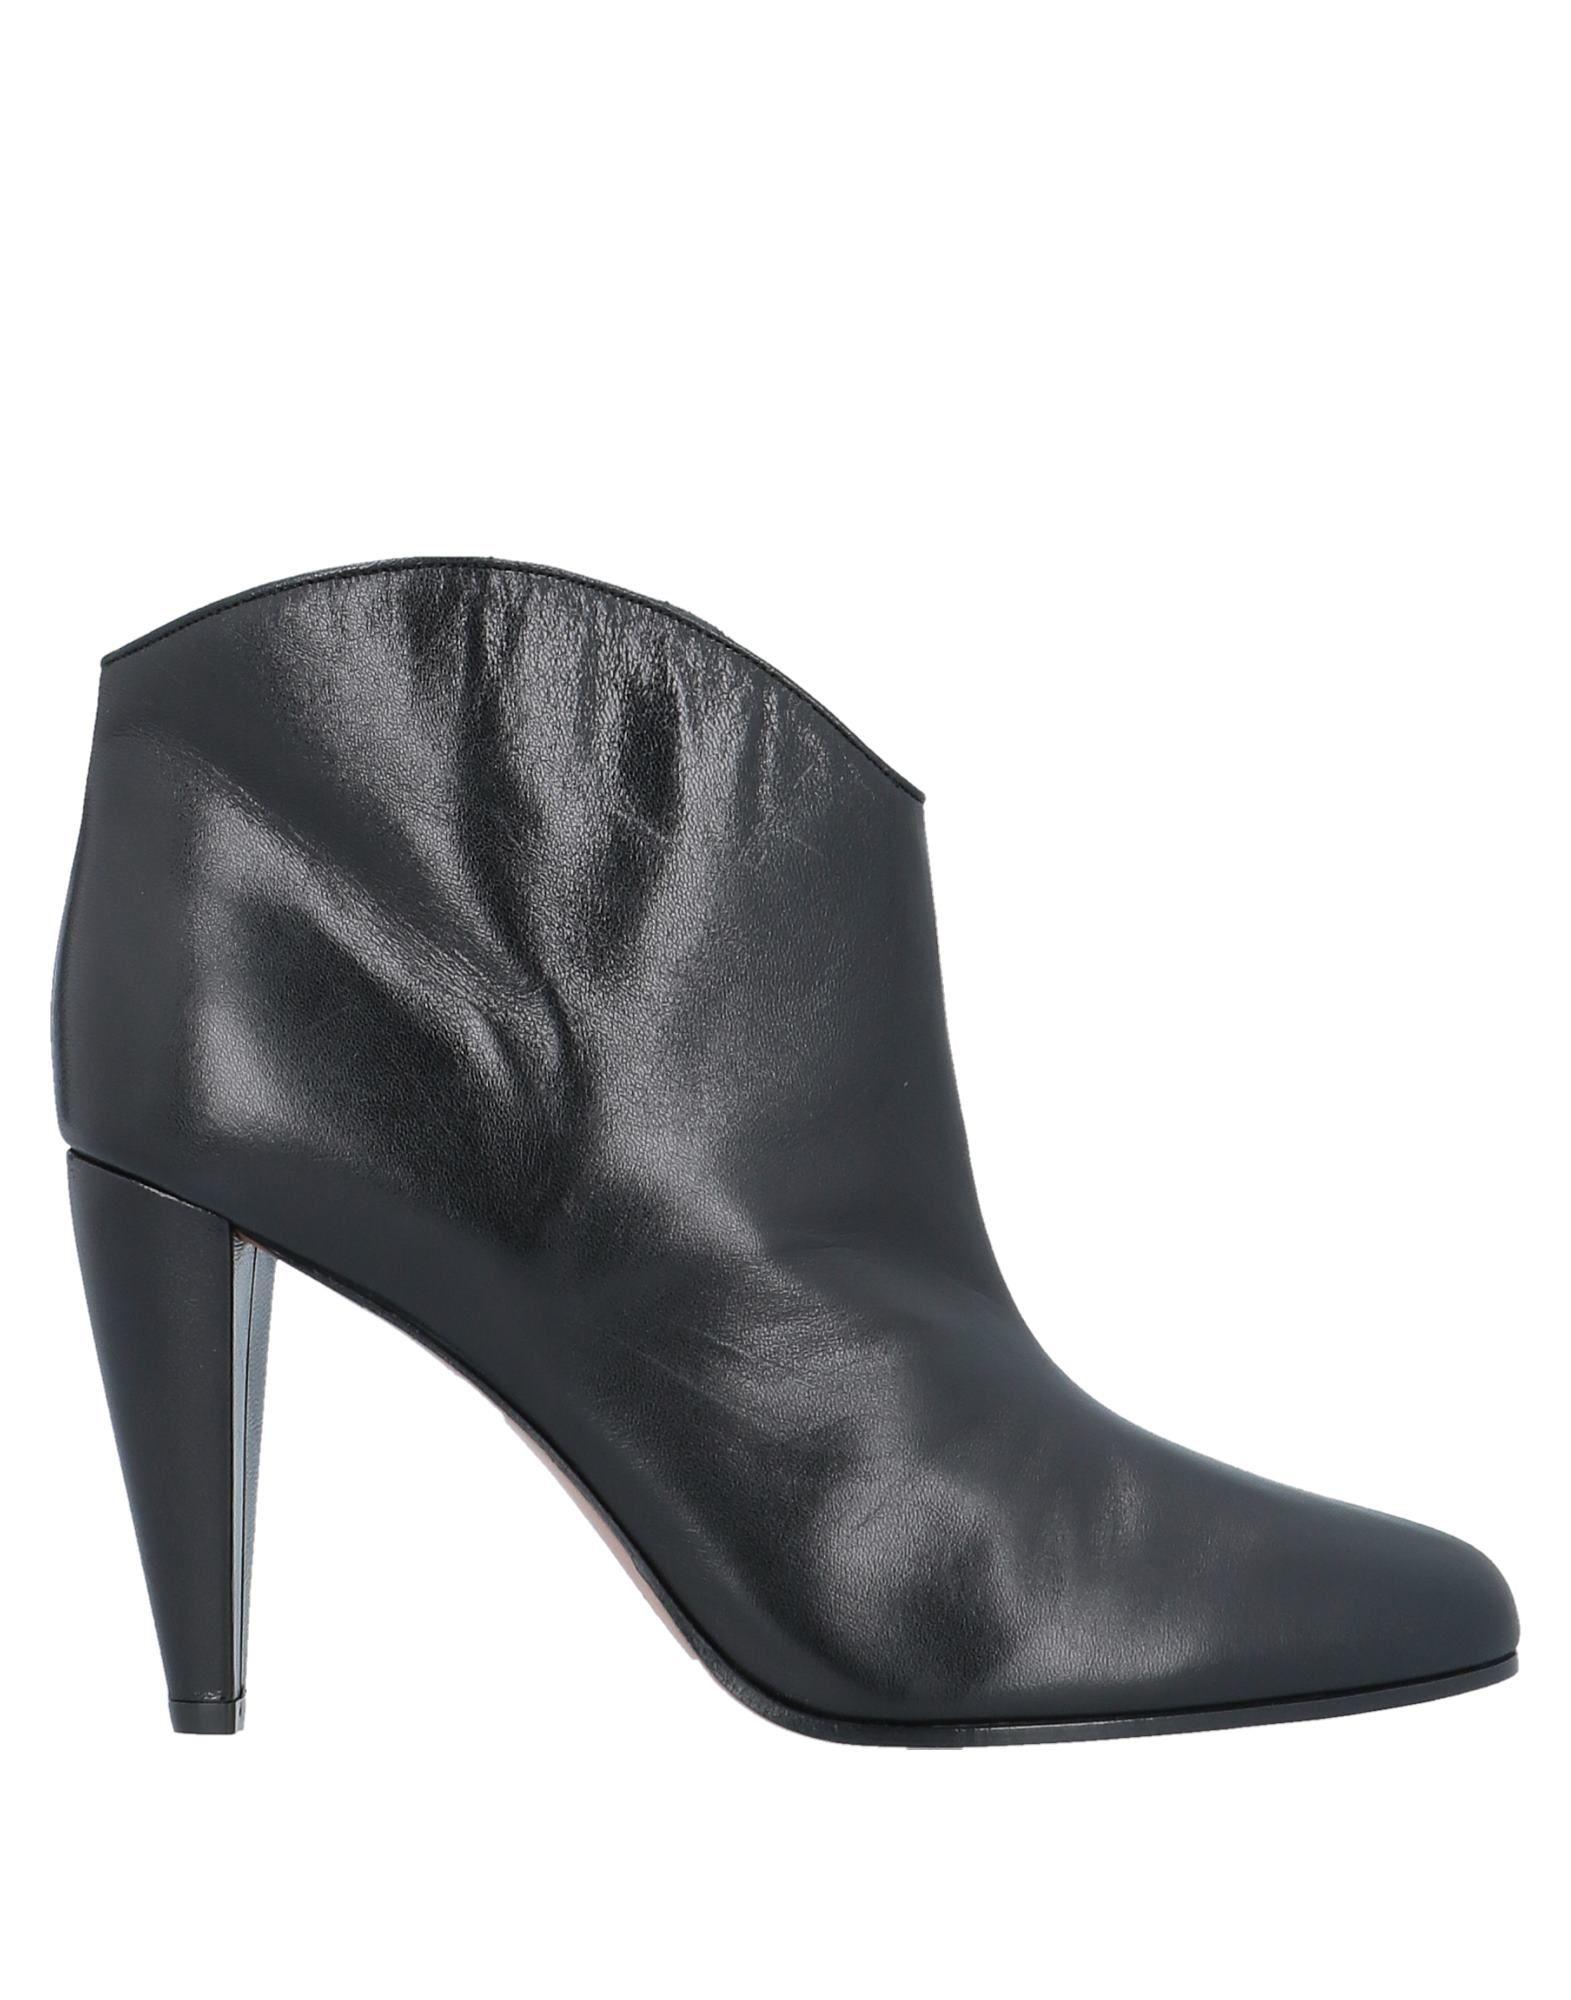 Celine Leather Ankle Boots in Black - Lyst